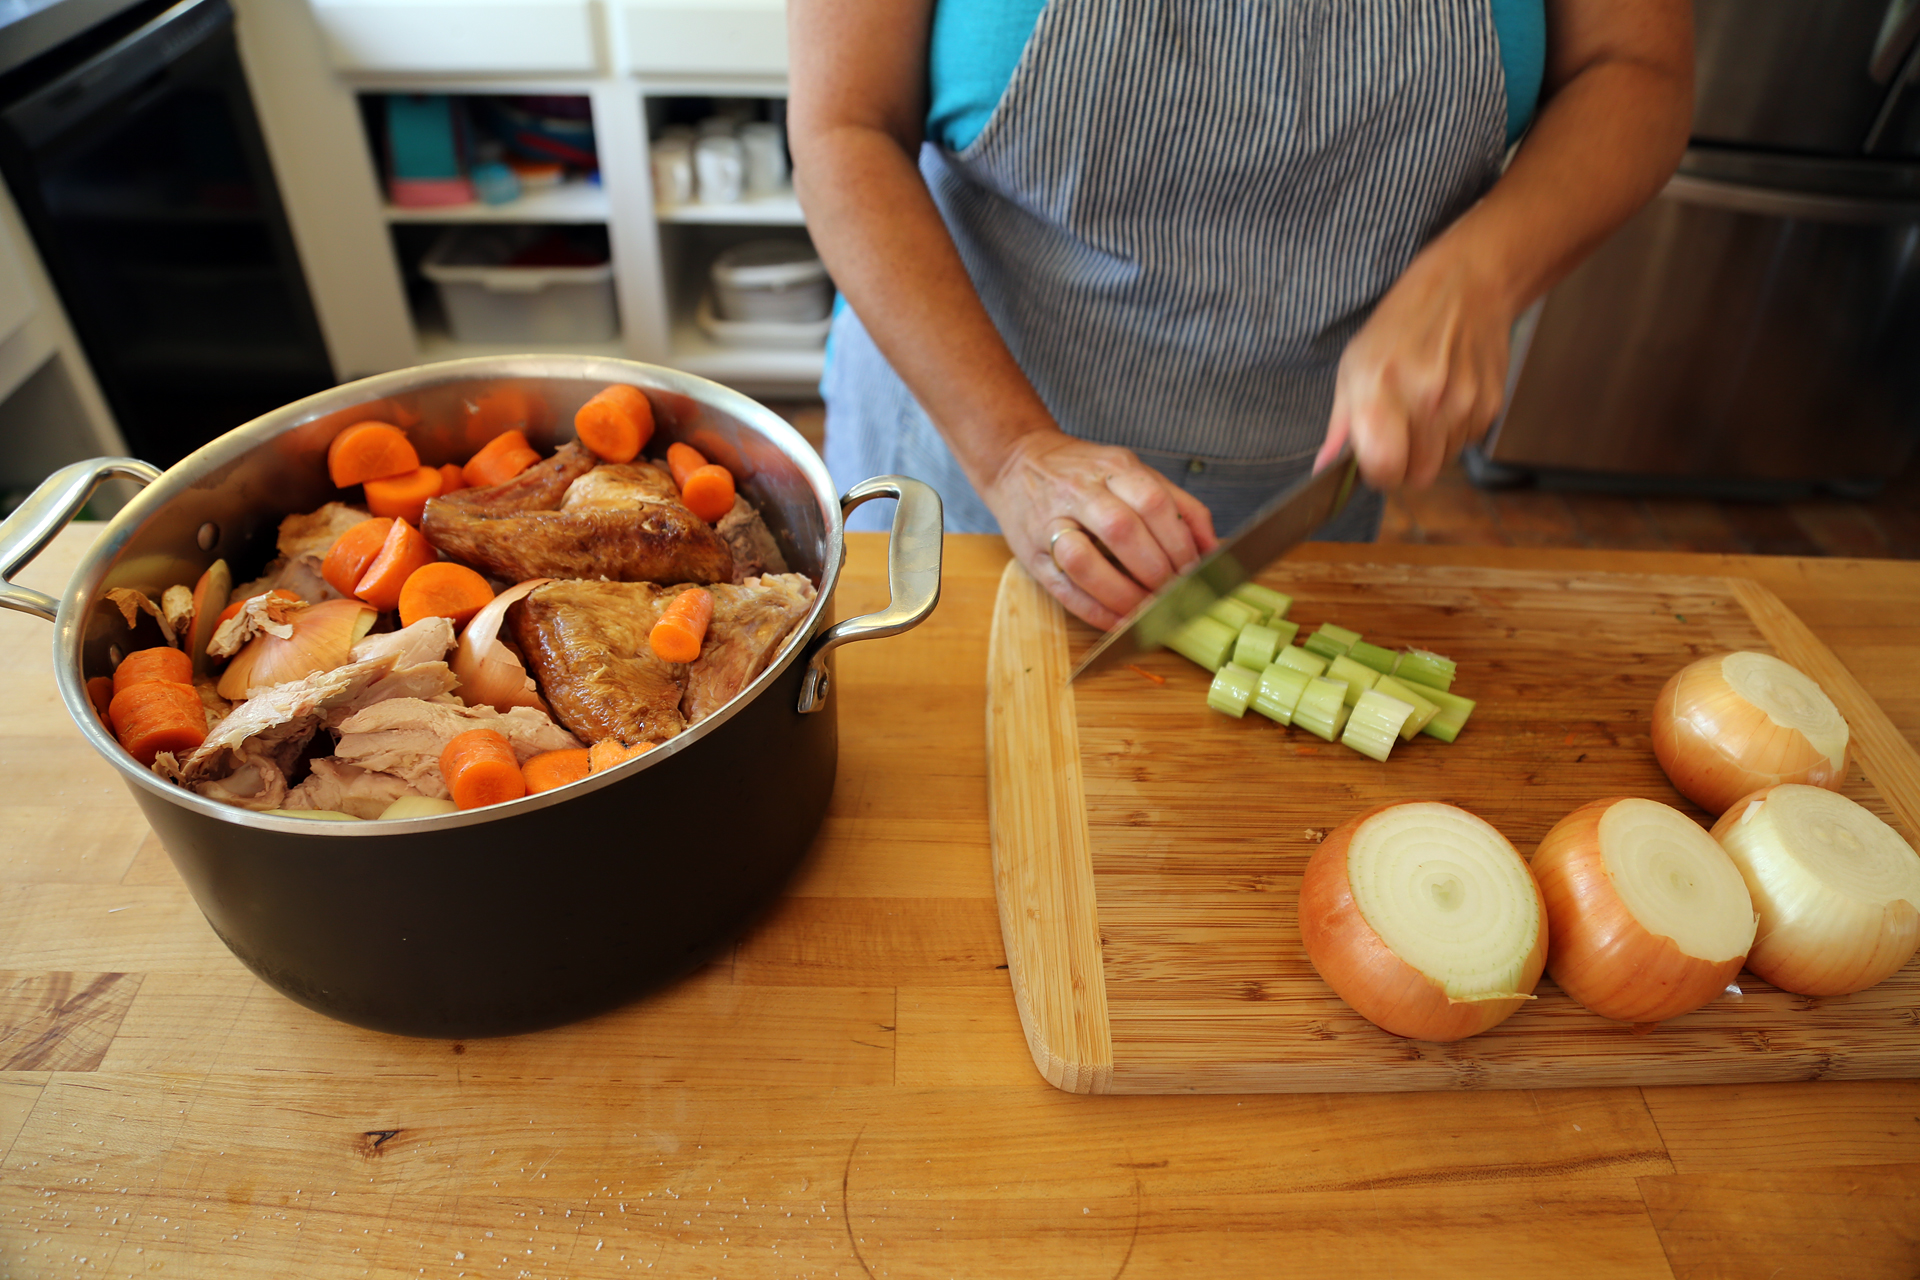 Prep the vegetables and add to the stock pot with the turkey carcass.